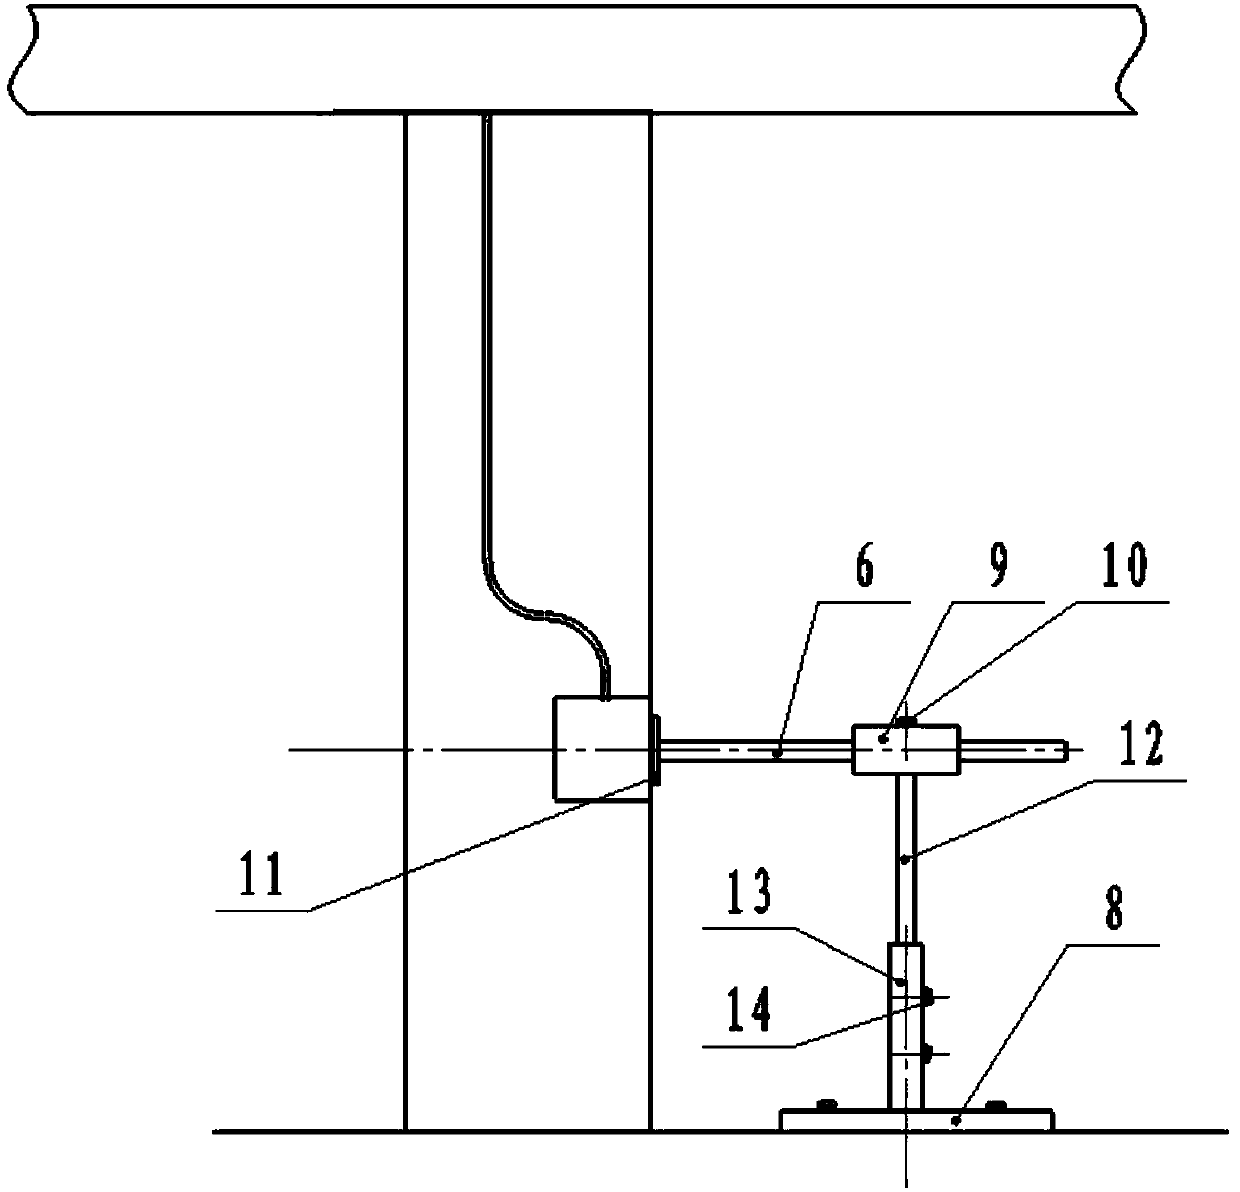 Construction method for building wire box mounting point construction frame